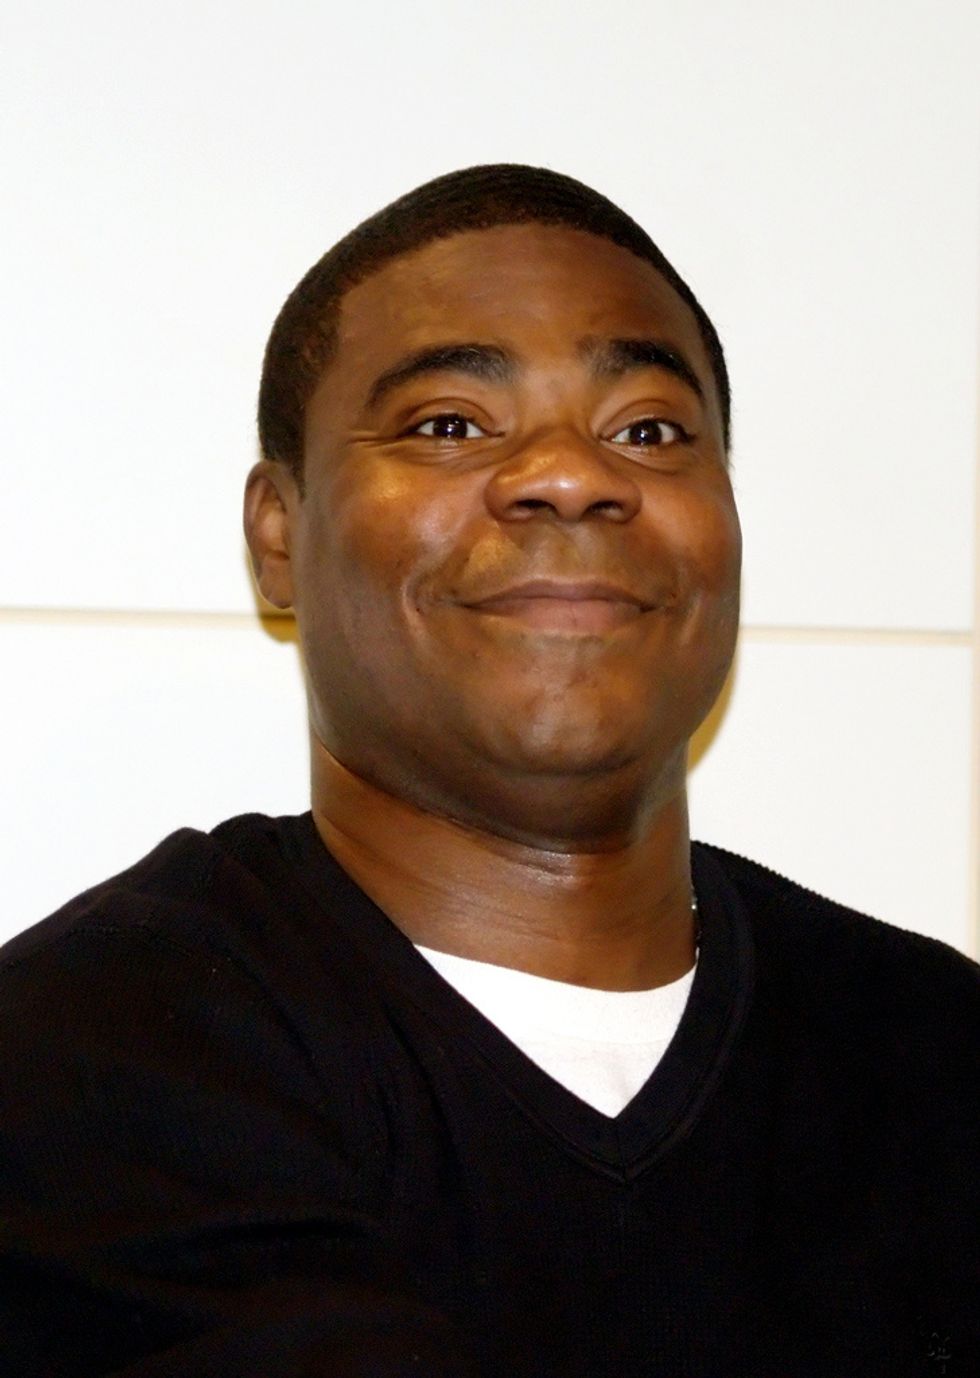 Tracy Morgan More Responsive In Wake Of Accident, Publicist Says